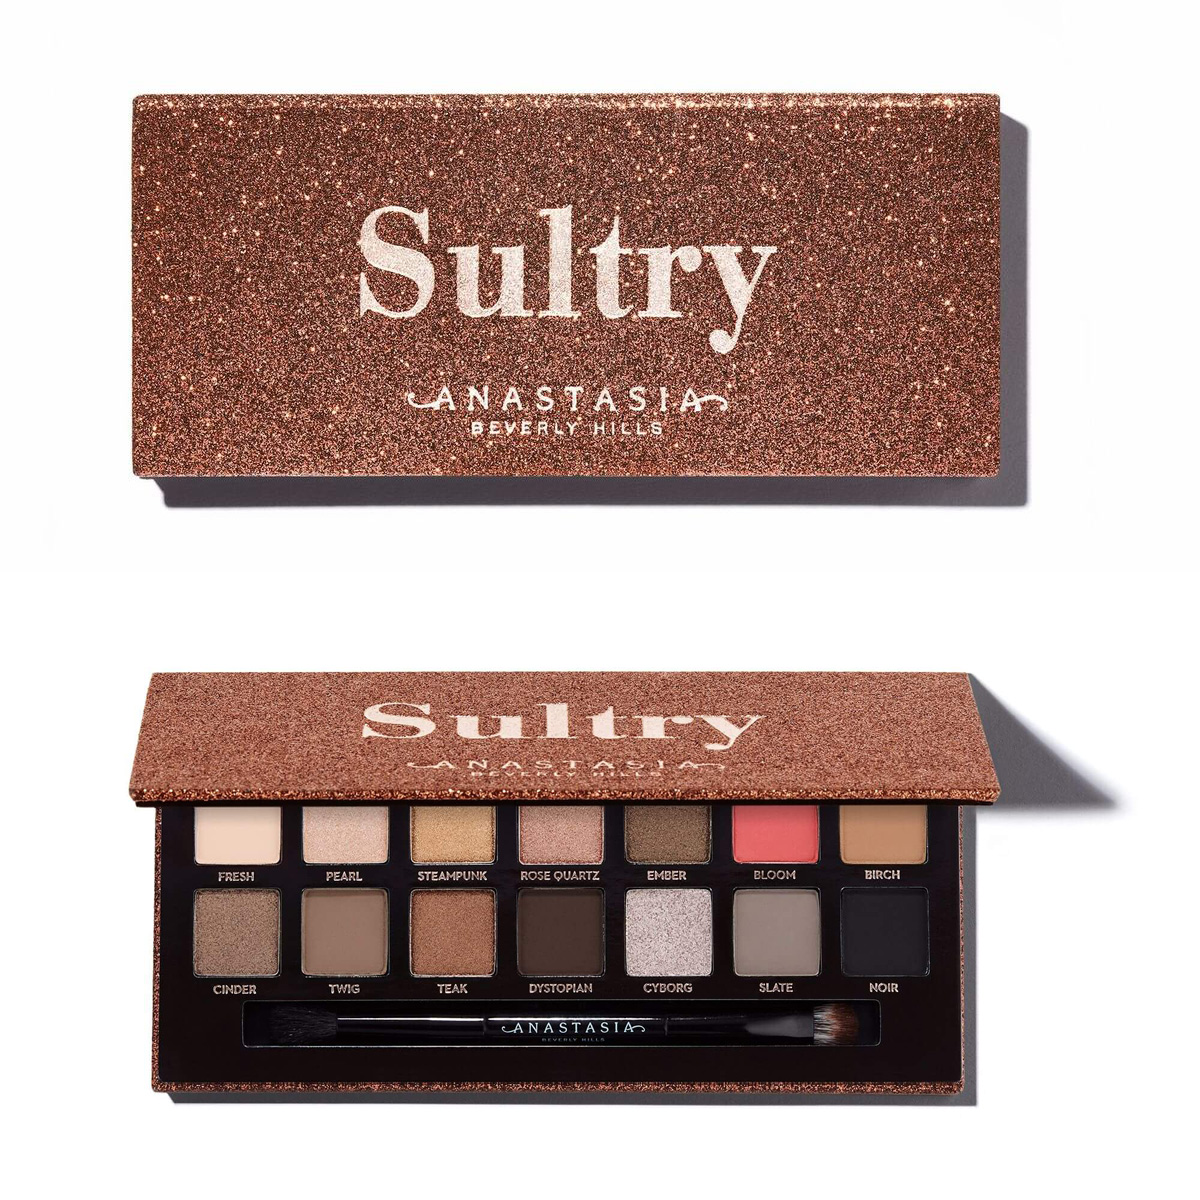 abh-sultry-eyeshadow-palette-release-date-1